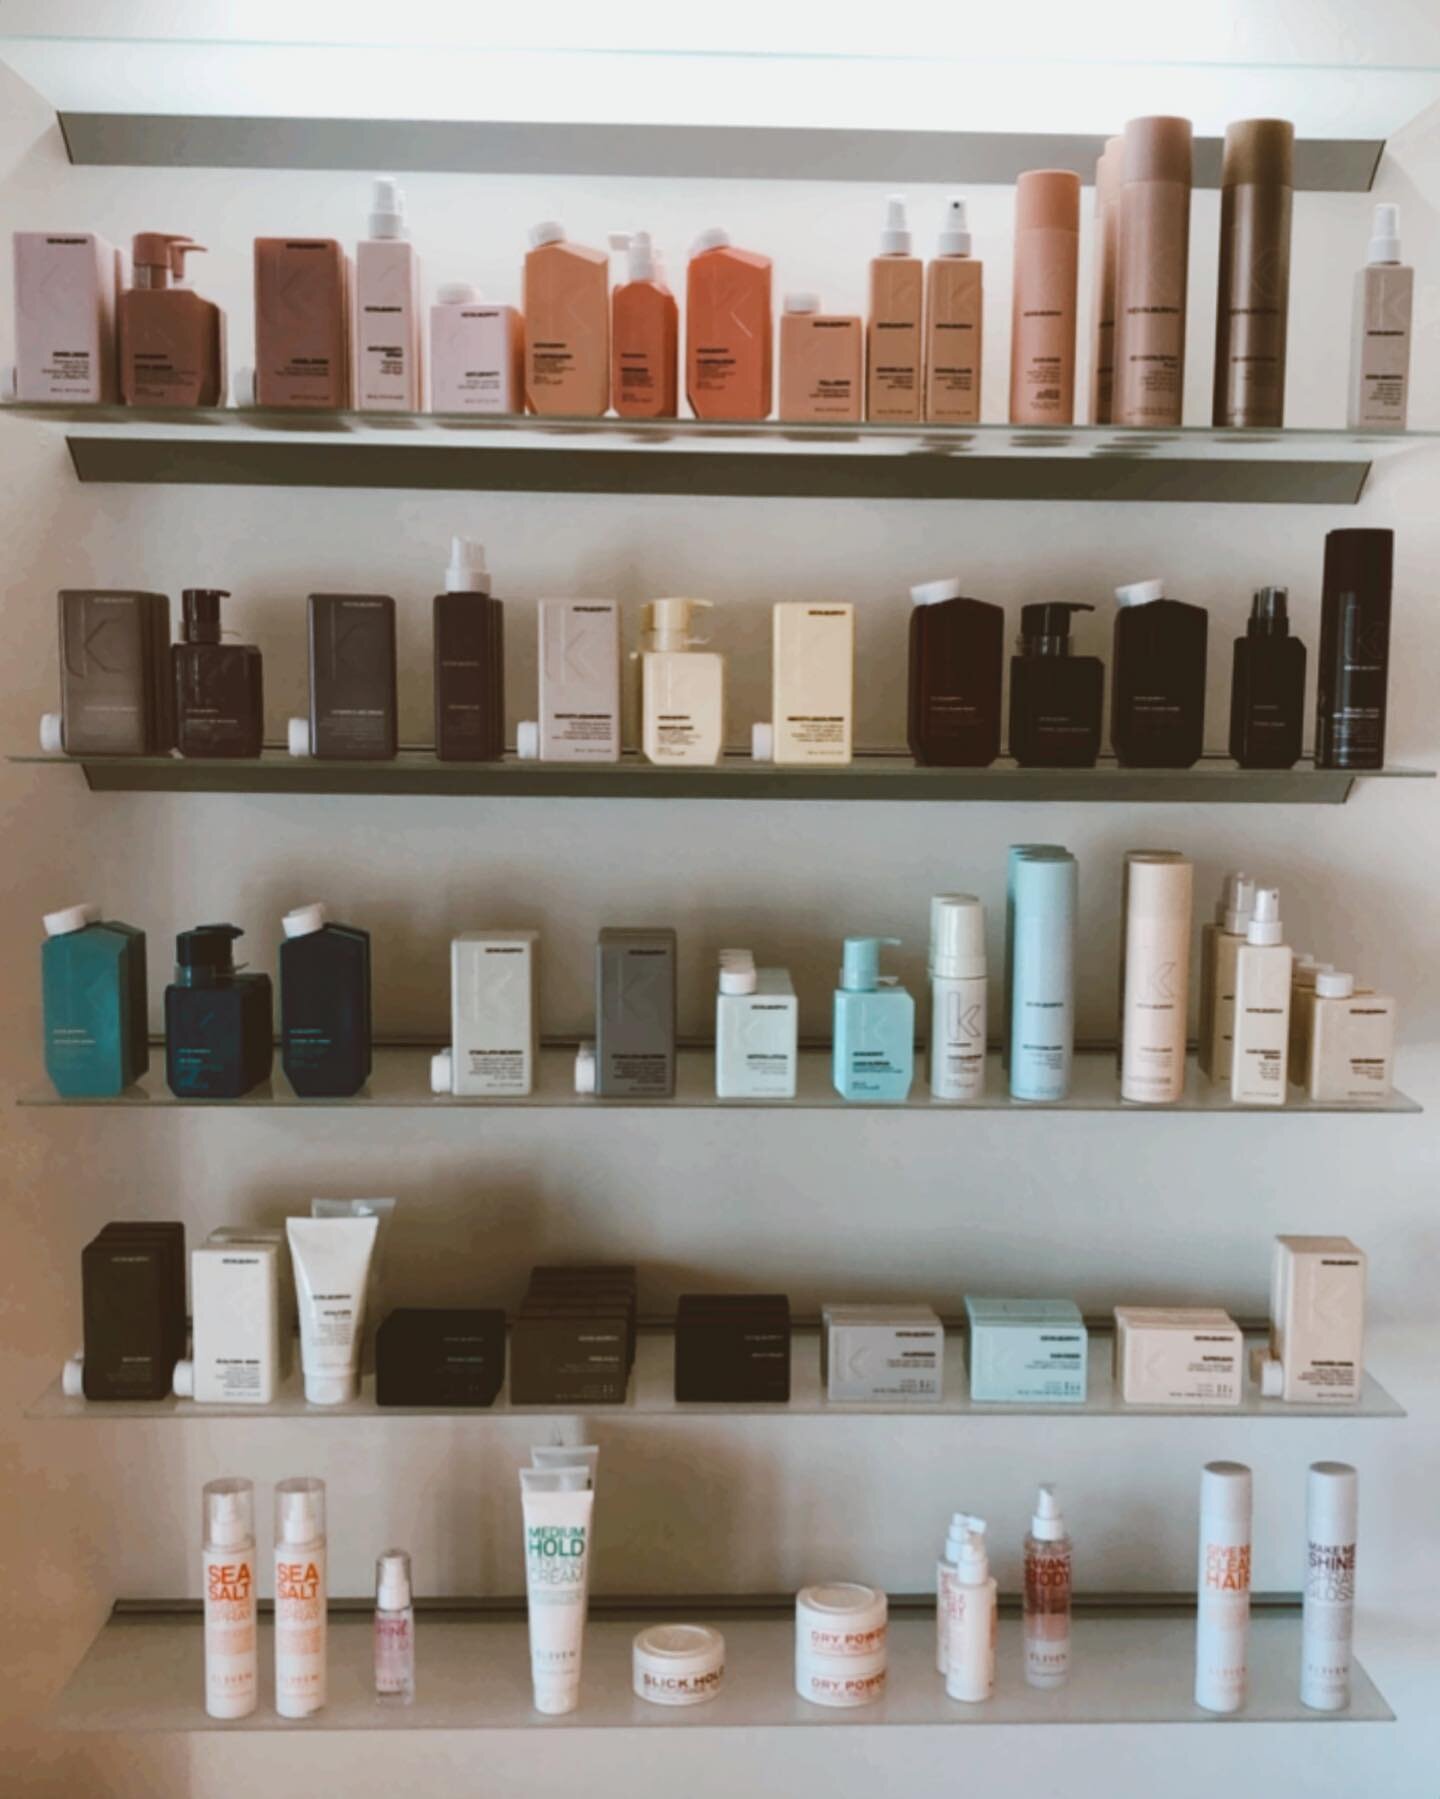 WE ARE STOCKED! WE KNOW HOW MUCH YOU LOVE @kevin.murphy @kevin.murphy.australia AS MUCH AS WE DO &bull; NEW PRODUCTS &amp; BRAND NEW SCALP TREATMENTS ADDED TO OUR PRODUCT WALL &bull; FRIDAY, WE&rsquo;RE IN LOVE &bull; STOP IN TOMORROW TO GRAB YOUR FA